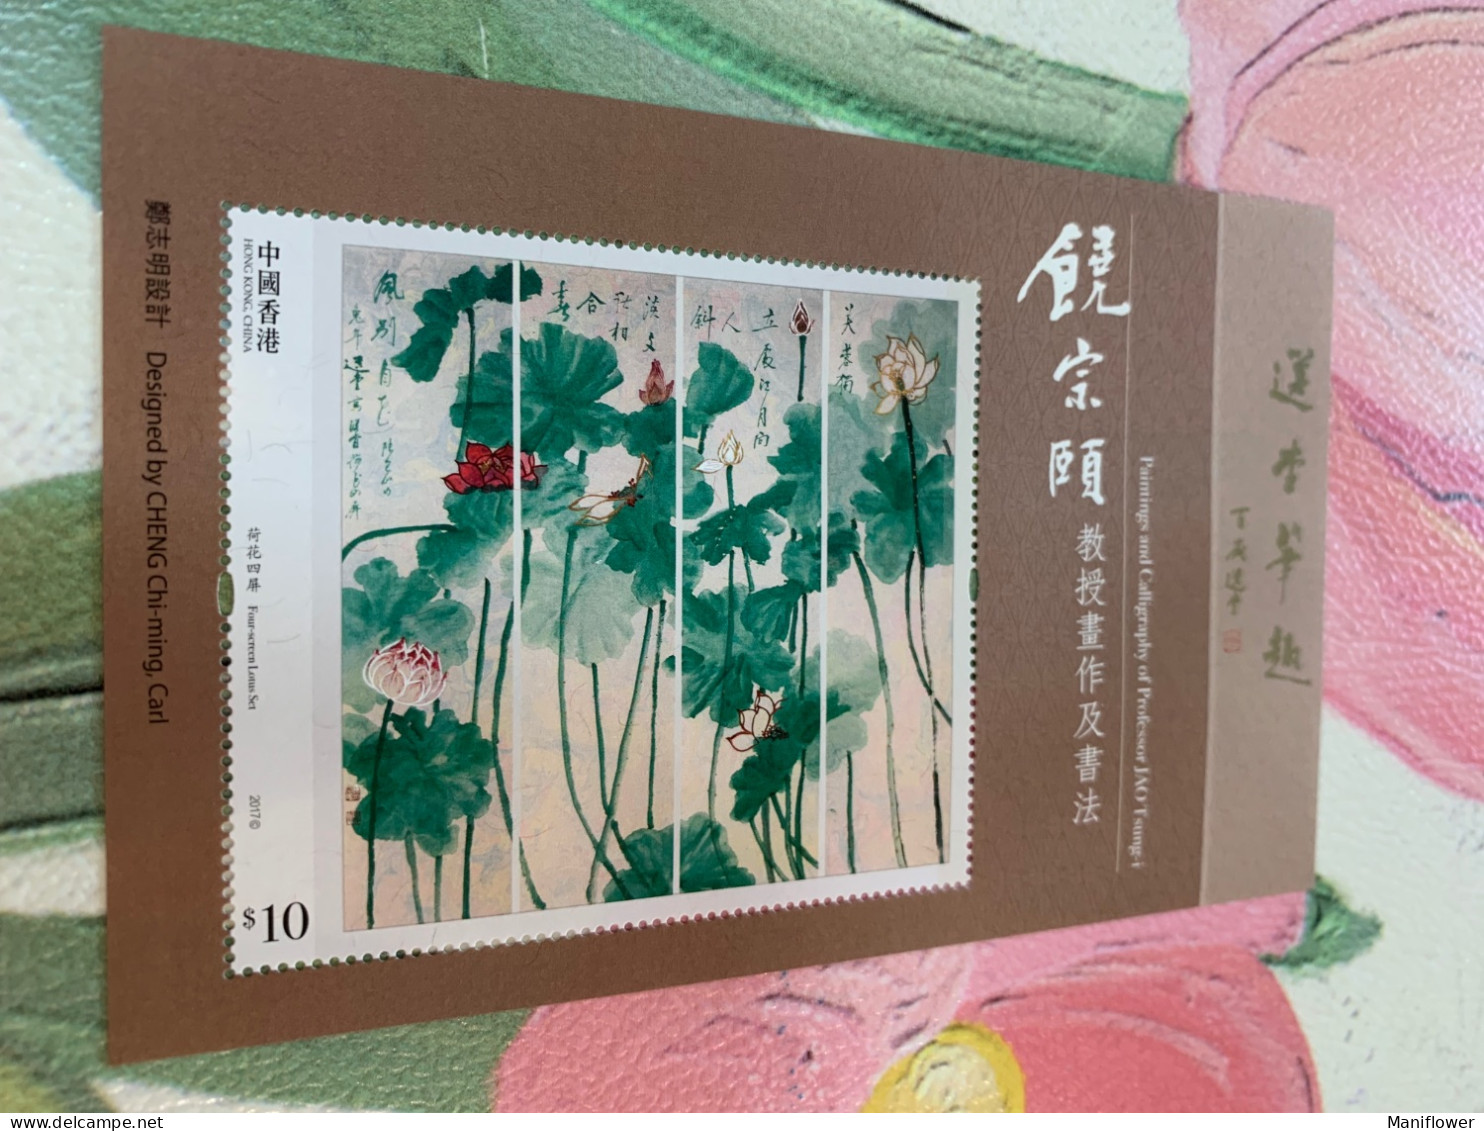 Hong Kong Stamp 2017 Paintings MNH - Covers & Documents